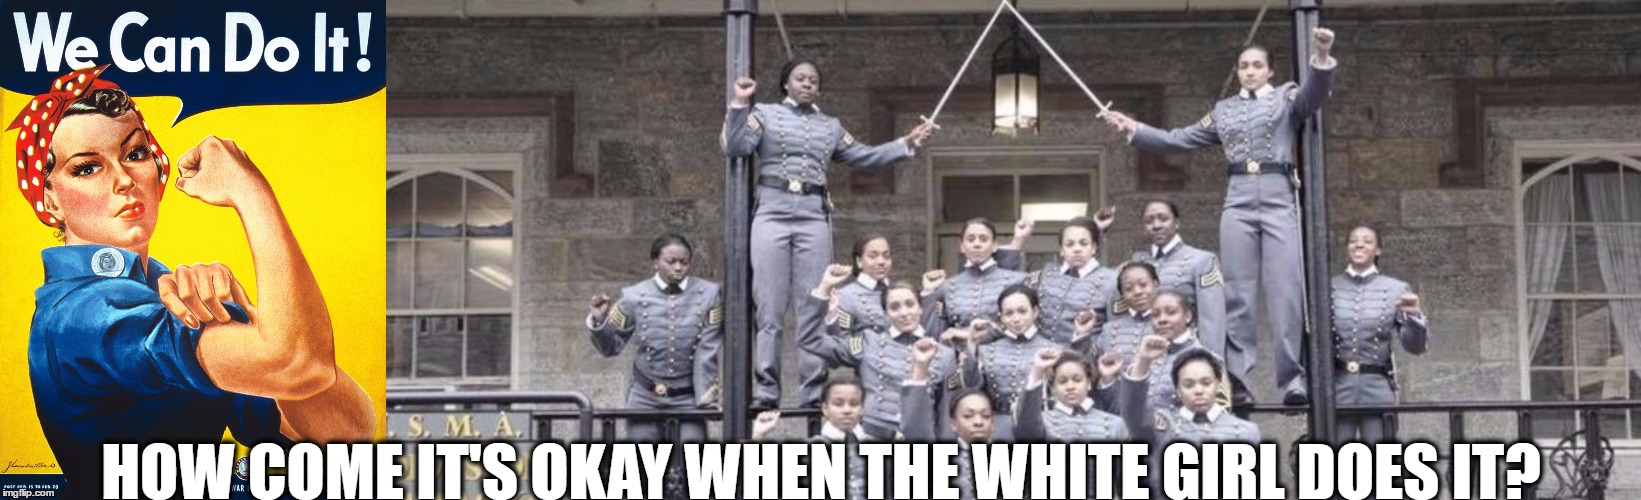 HOW COME IT'S OKAY WHEN THE WHITE GIRL DOES IT? | image tagged in west point,we can do it,rosie,wwii | made w/ Imgflip meme maker